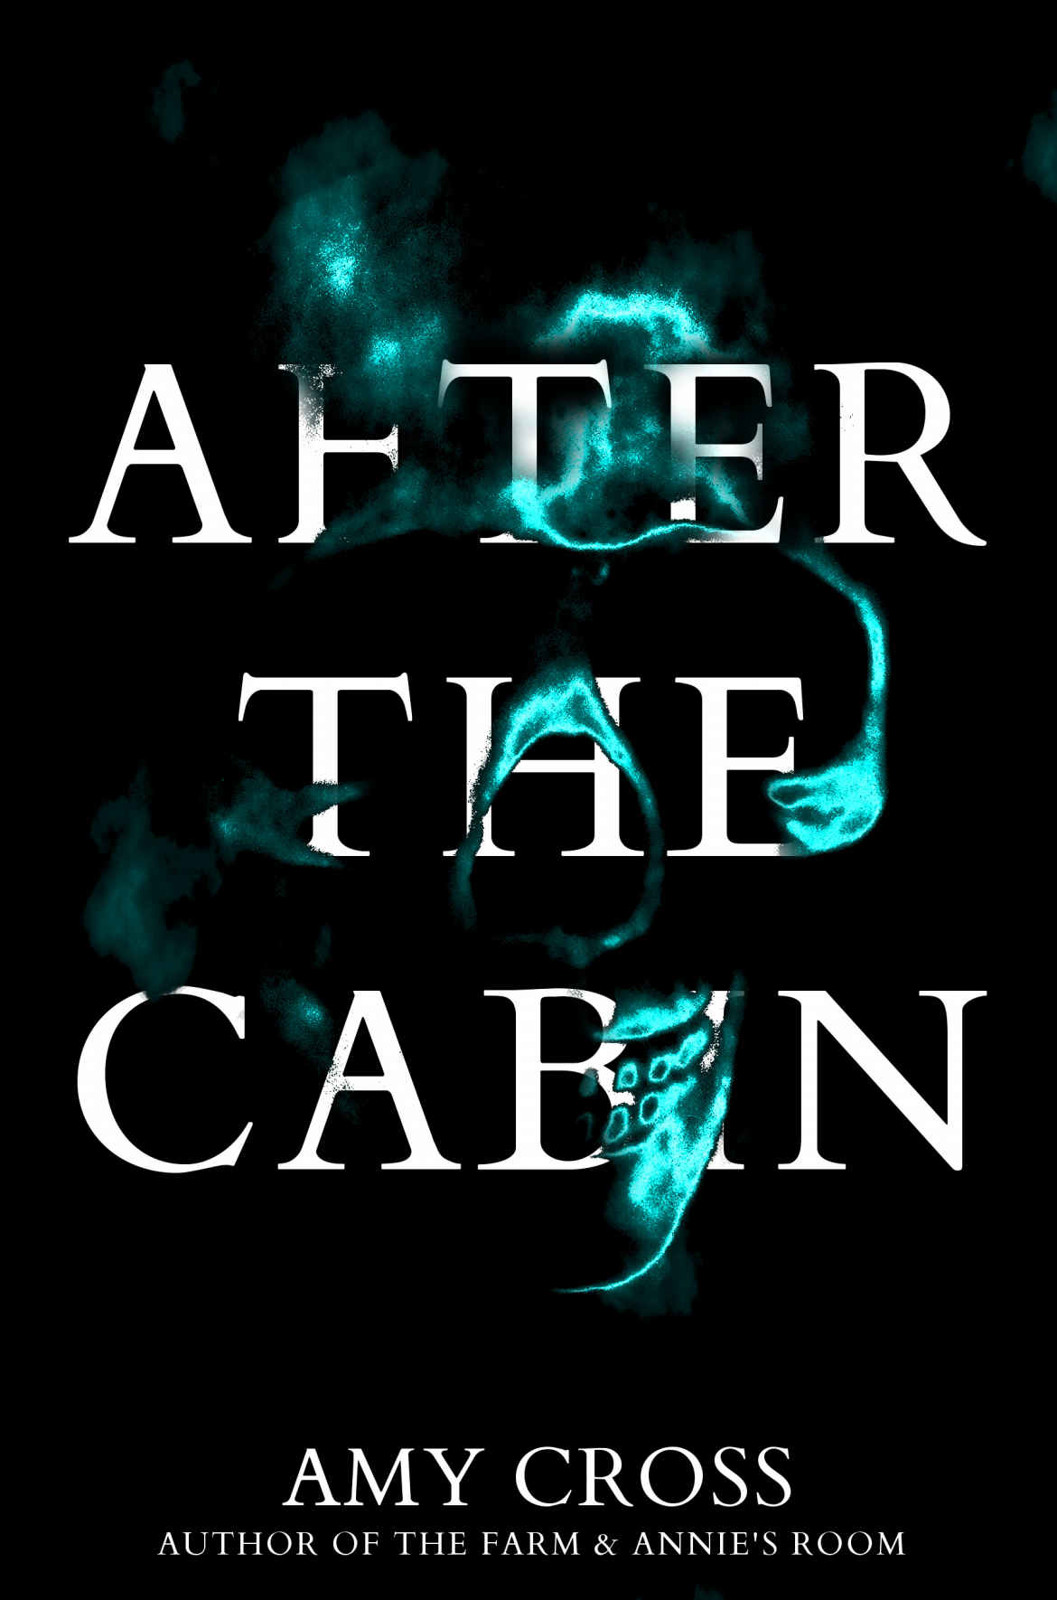 After the Cabin by Amy Cross